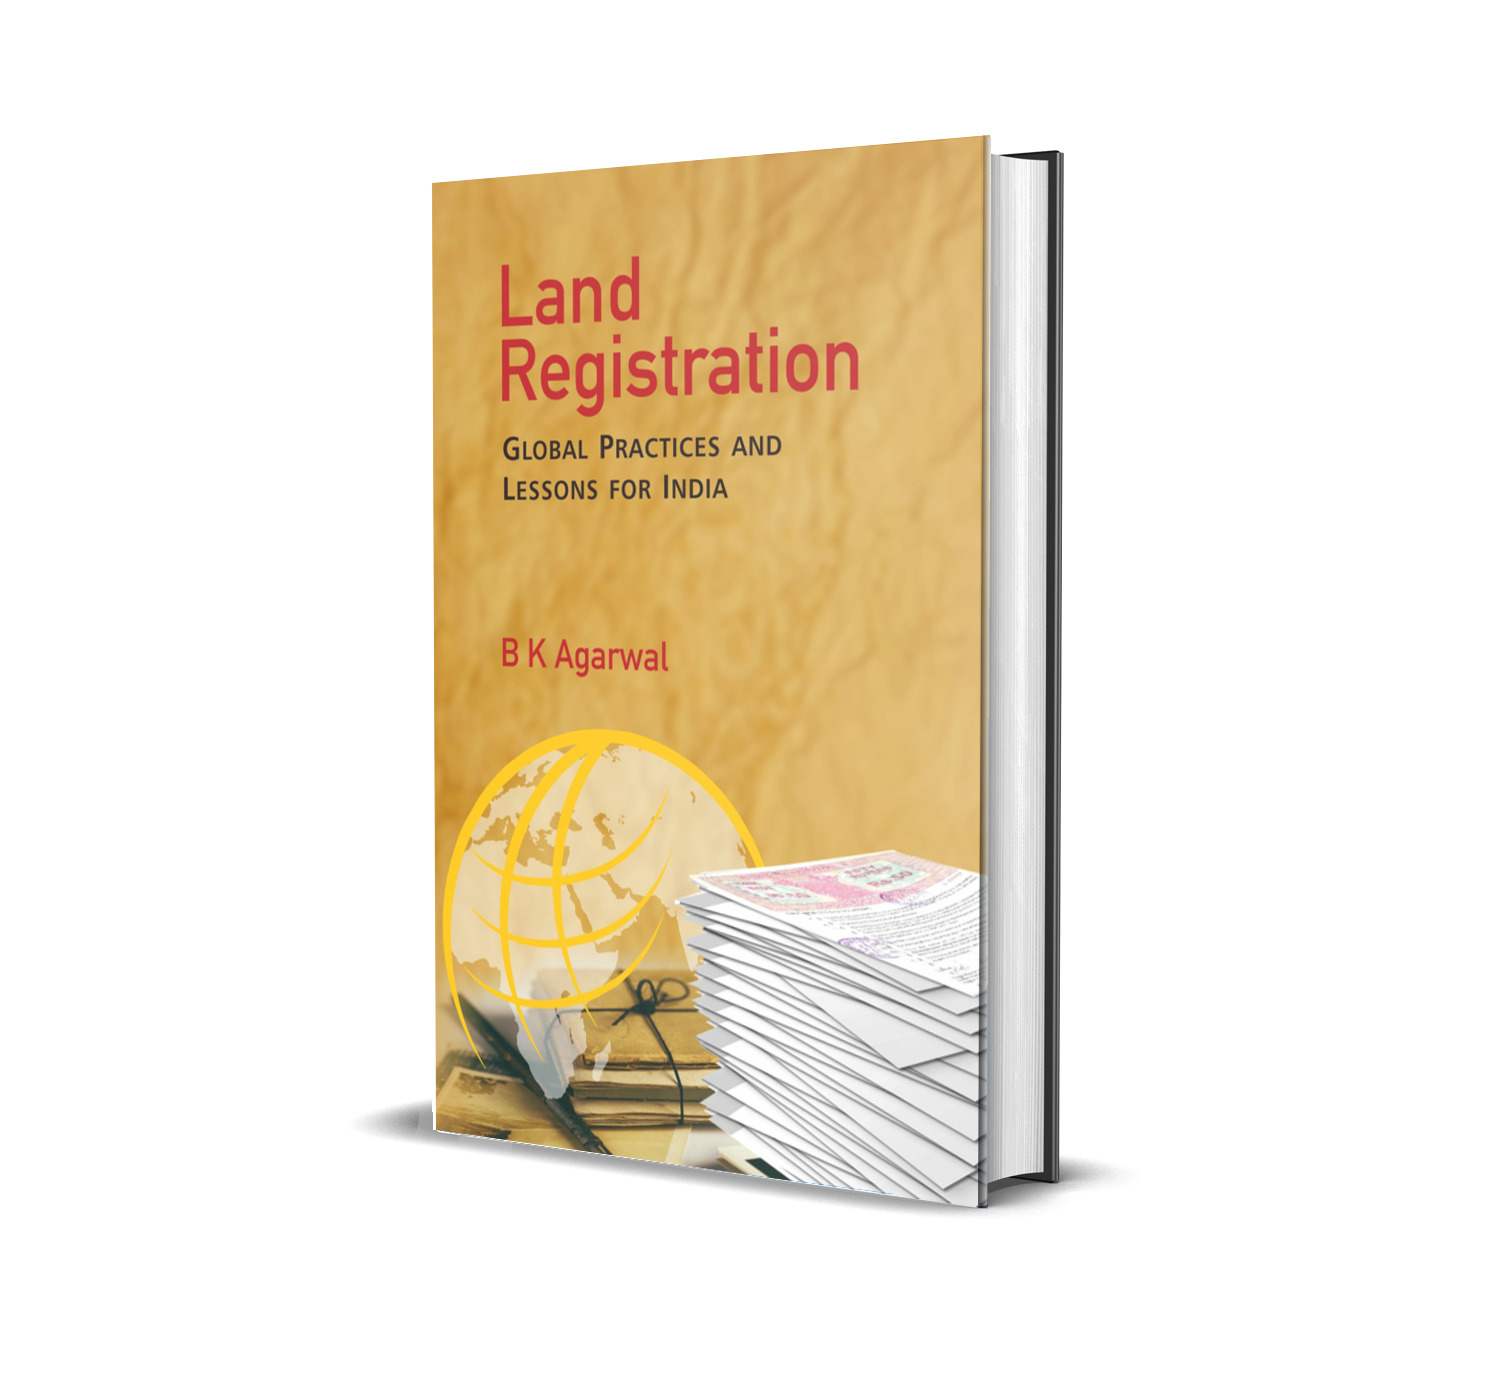 land Registration: Global Practices and Lessons for India